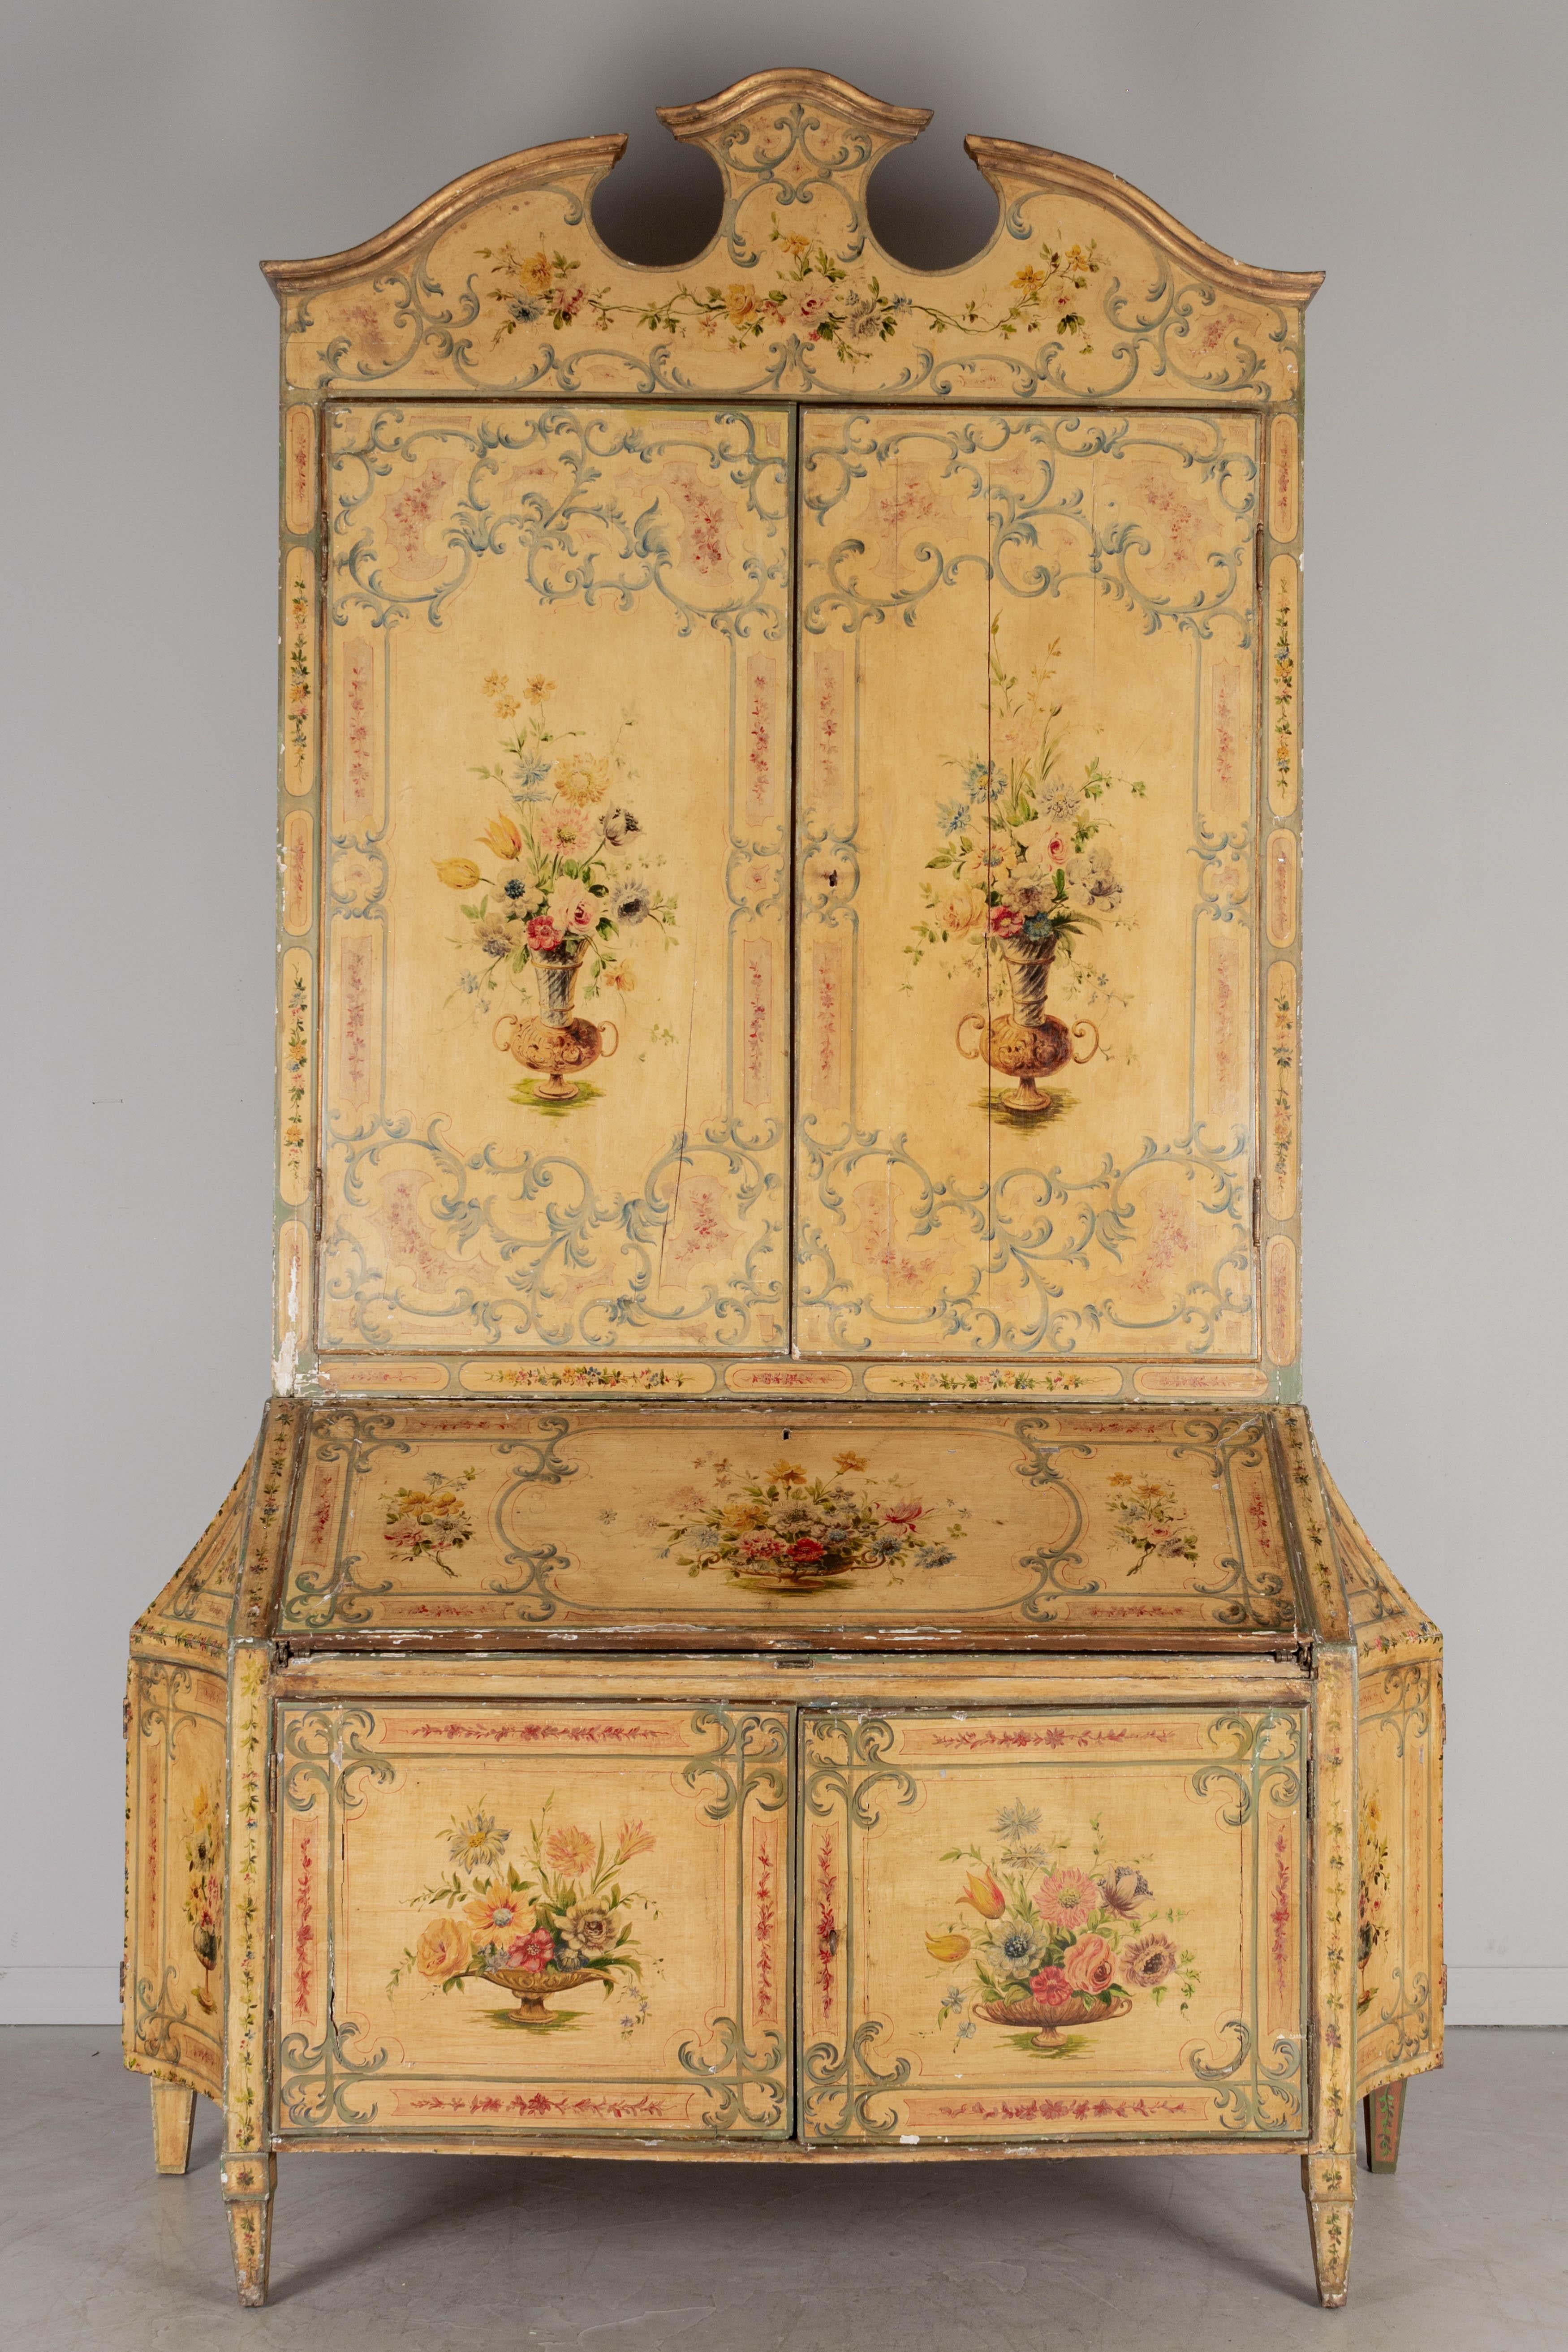 An early 19th century Baroque style Venetian polychrome painted pine tall secretary, in two parts with a tall bookcase and a slant front drop leaf desk. Beautifully hand-painted with floral bouquets and garlands framed by scrolling cartouche motif.